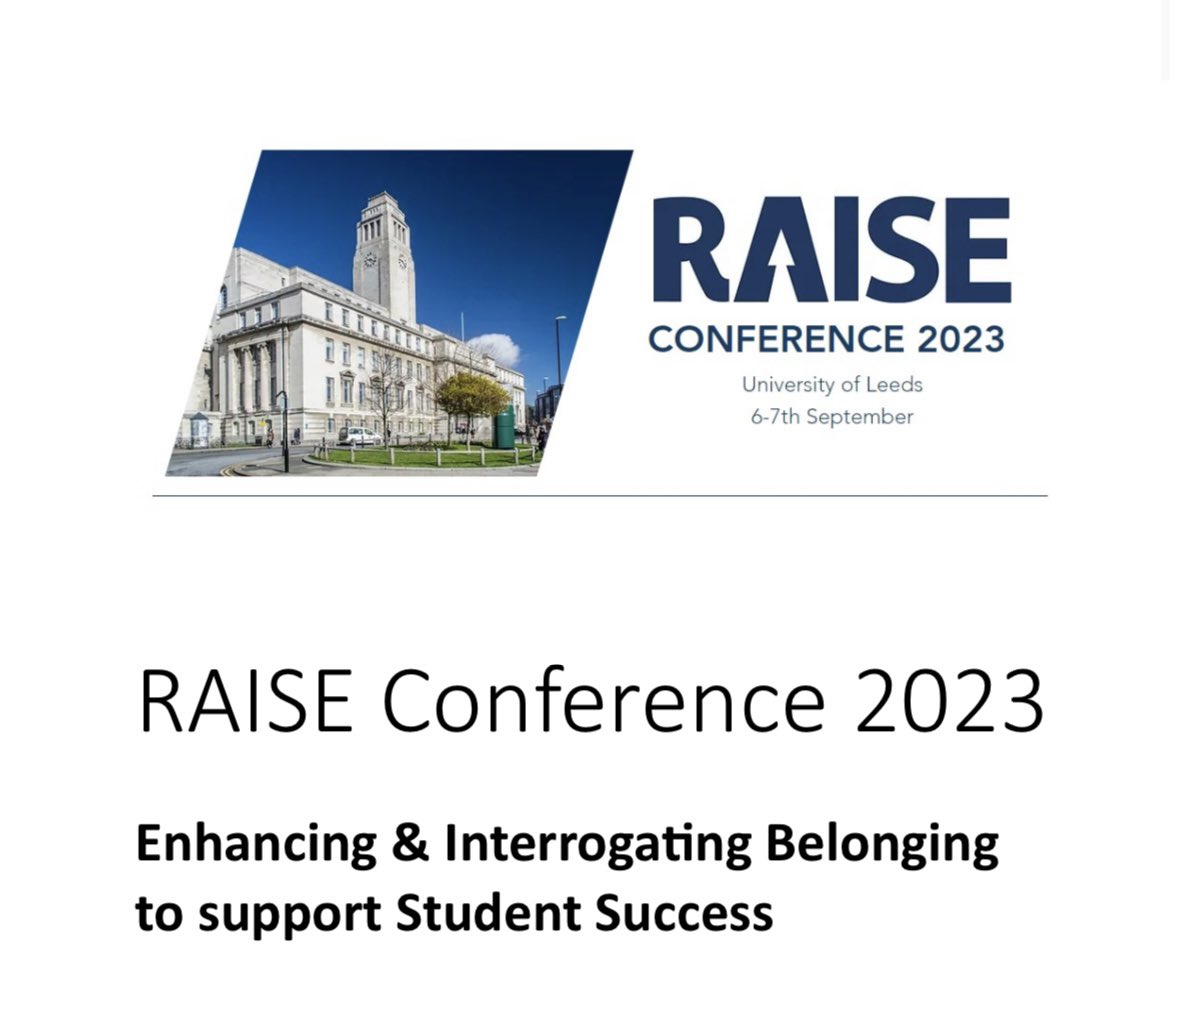 A brilliant two days attending the @RAISEnetwork 2023 Conference. Important discussions around student belonging and success and it’s been interesting to hear experiences from other universities 💭 Thank you to the organisers for offering this online as well 👏🏼 #RAISE23